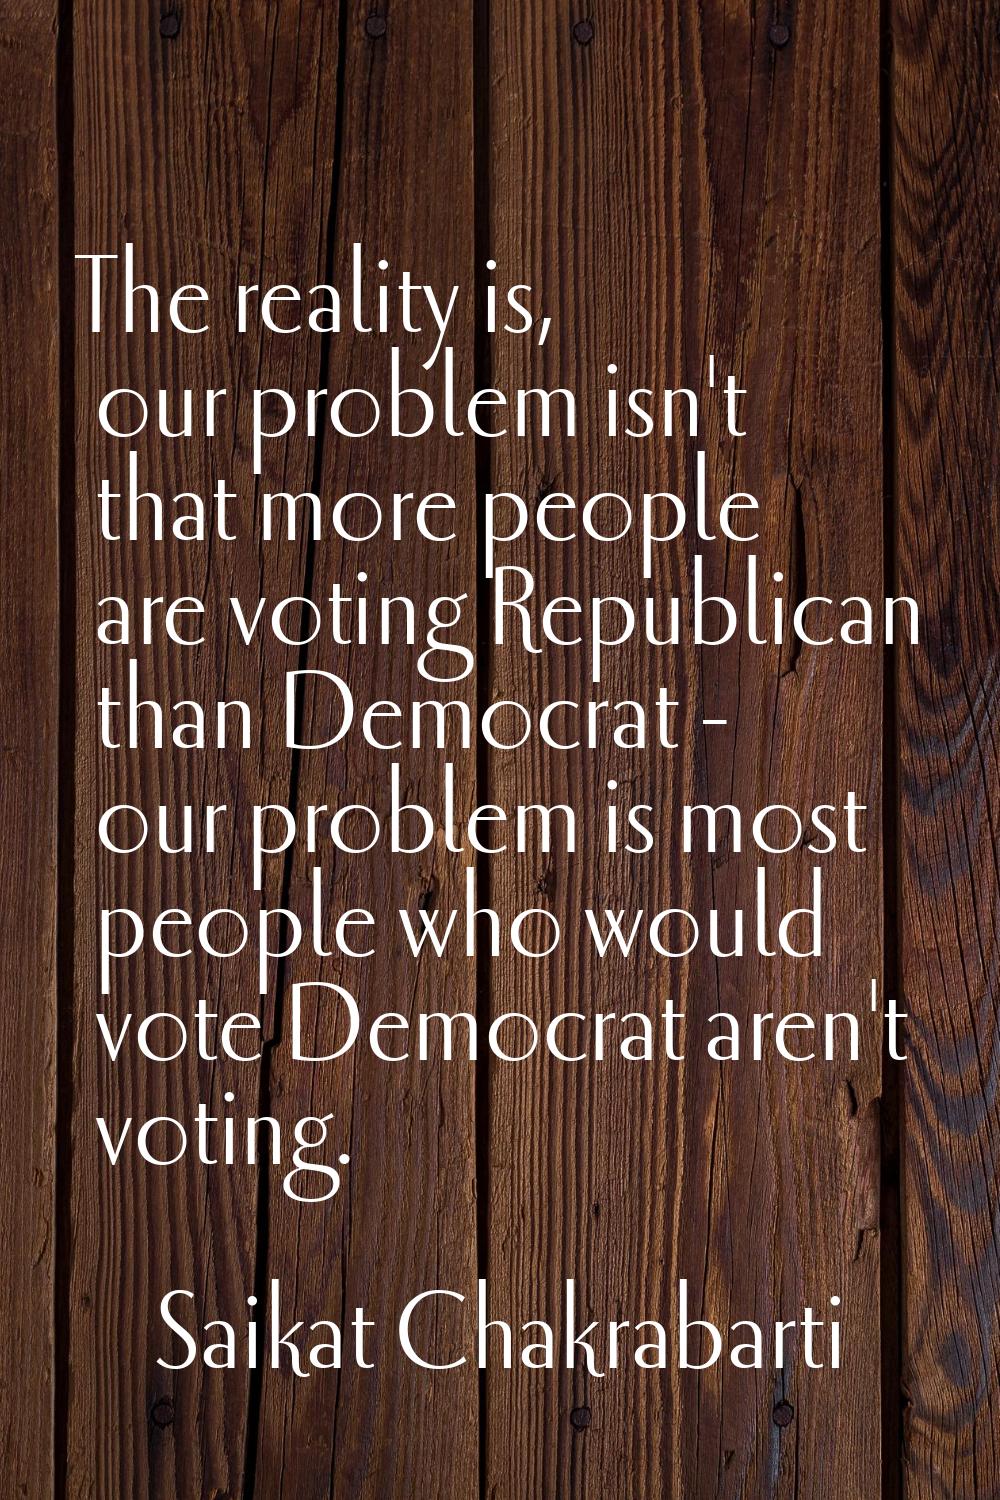 The reality is, our problem isn't that more people are voting Republican than Democrat - our proble